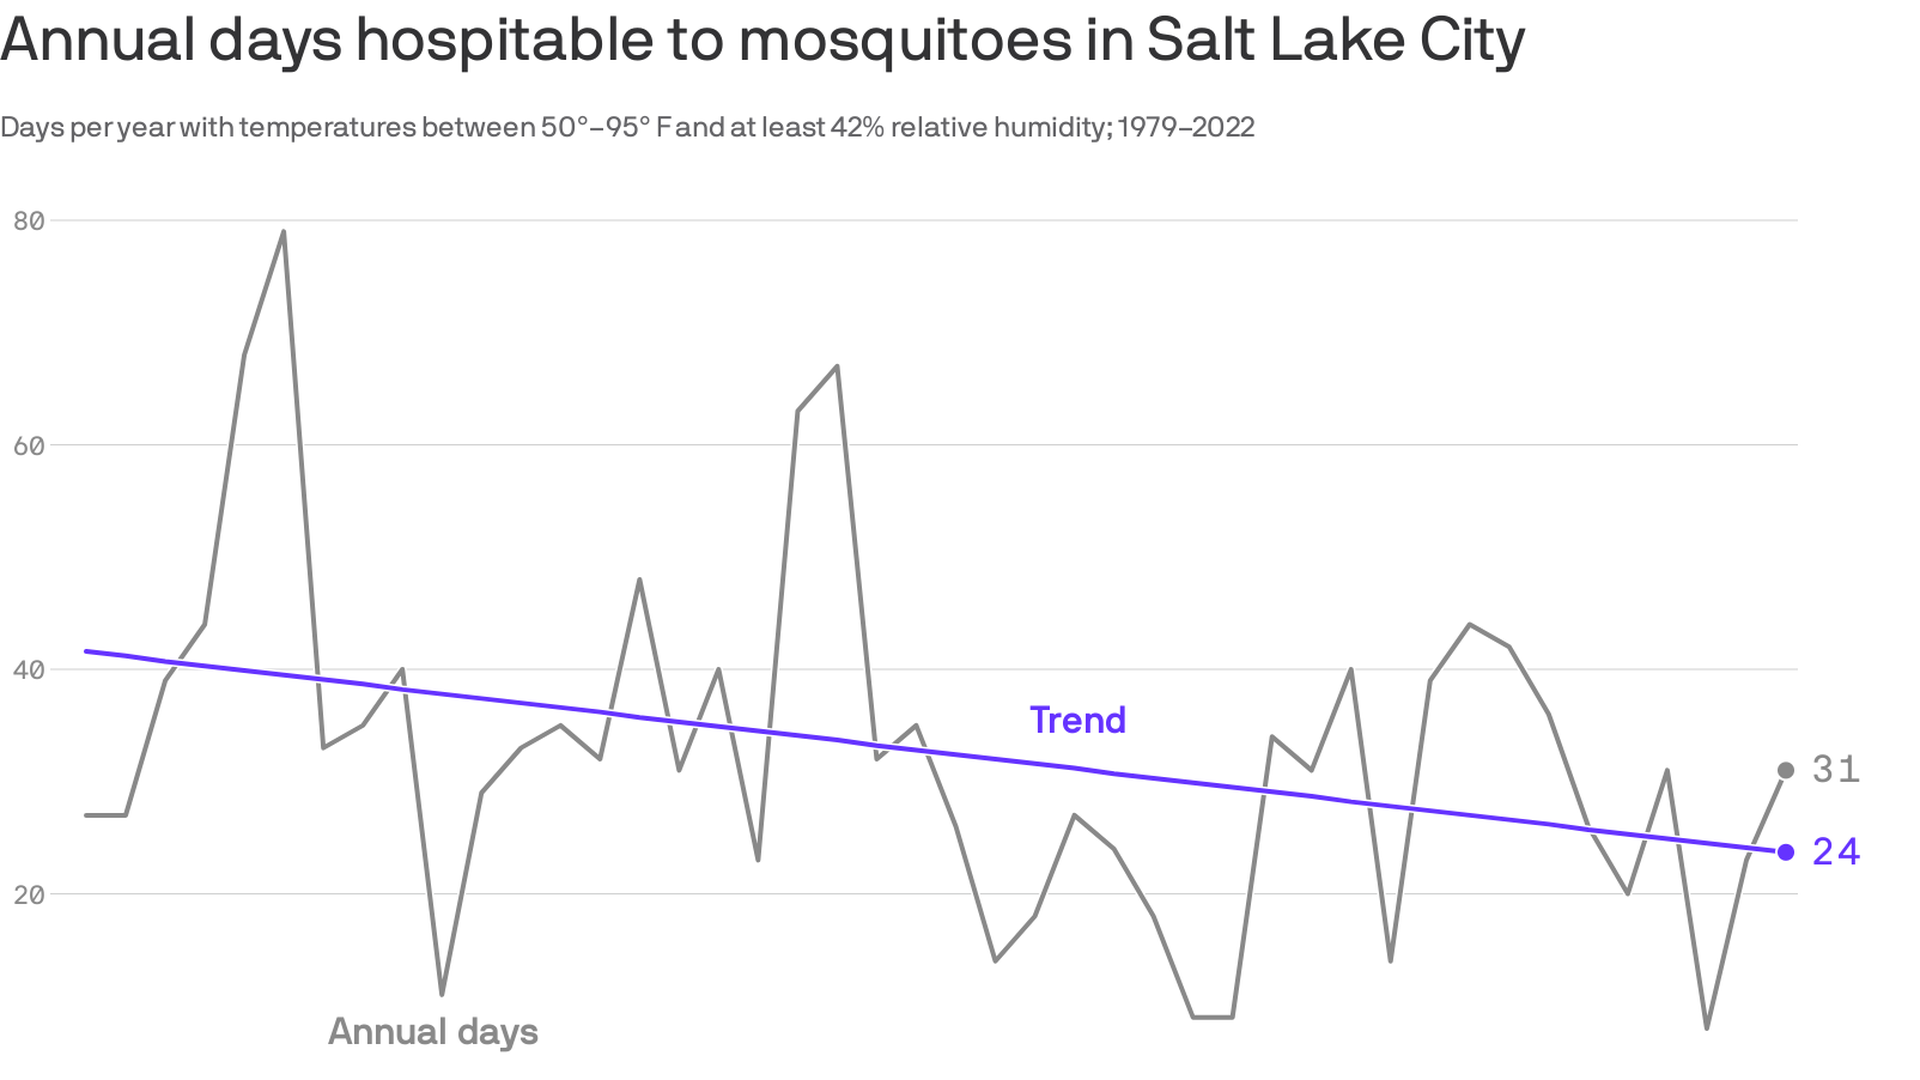 A chart shows days with mosquito-favorable temperatures declining.